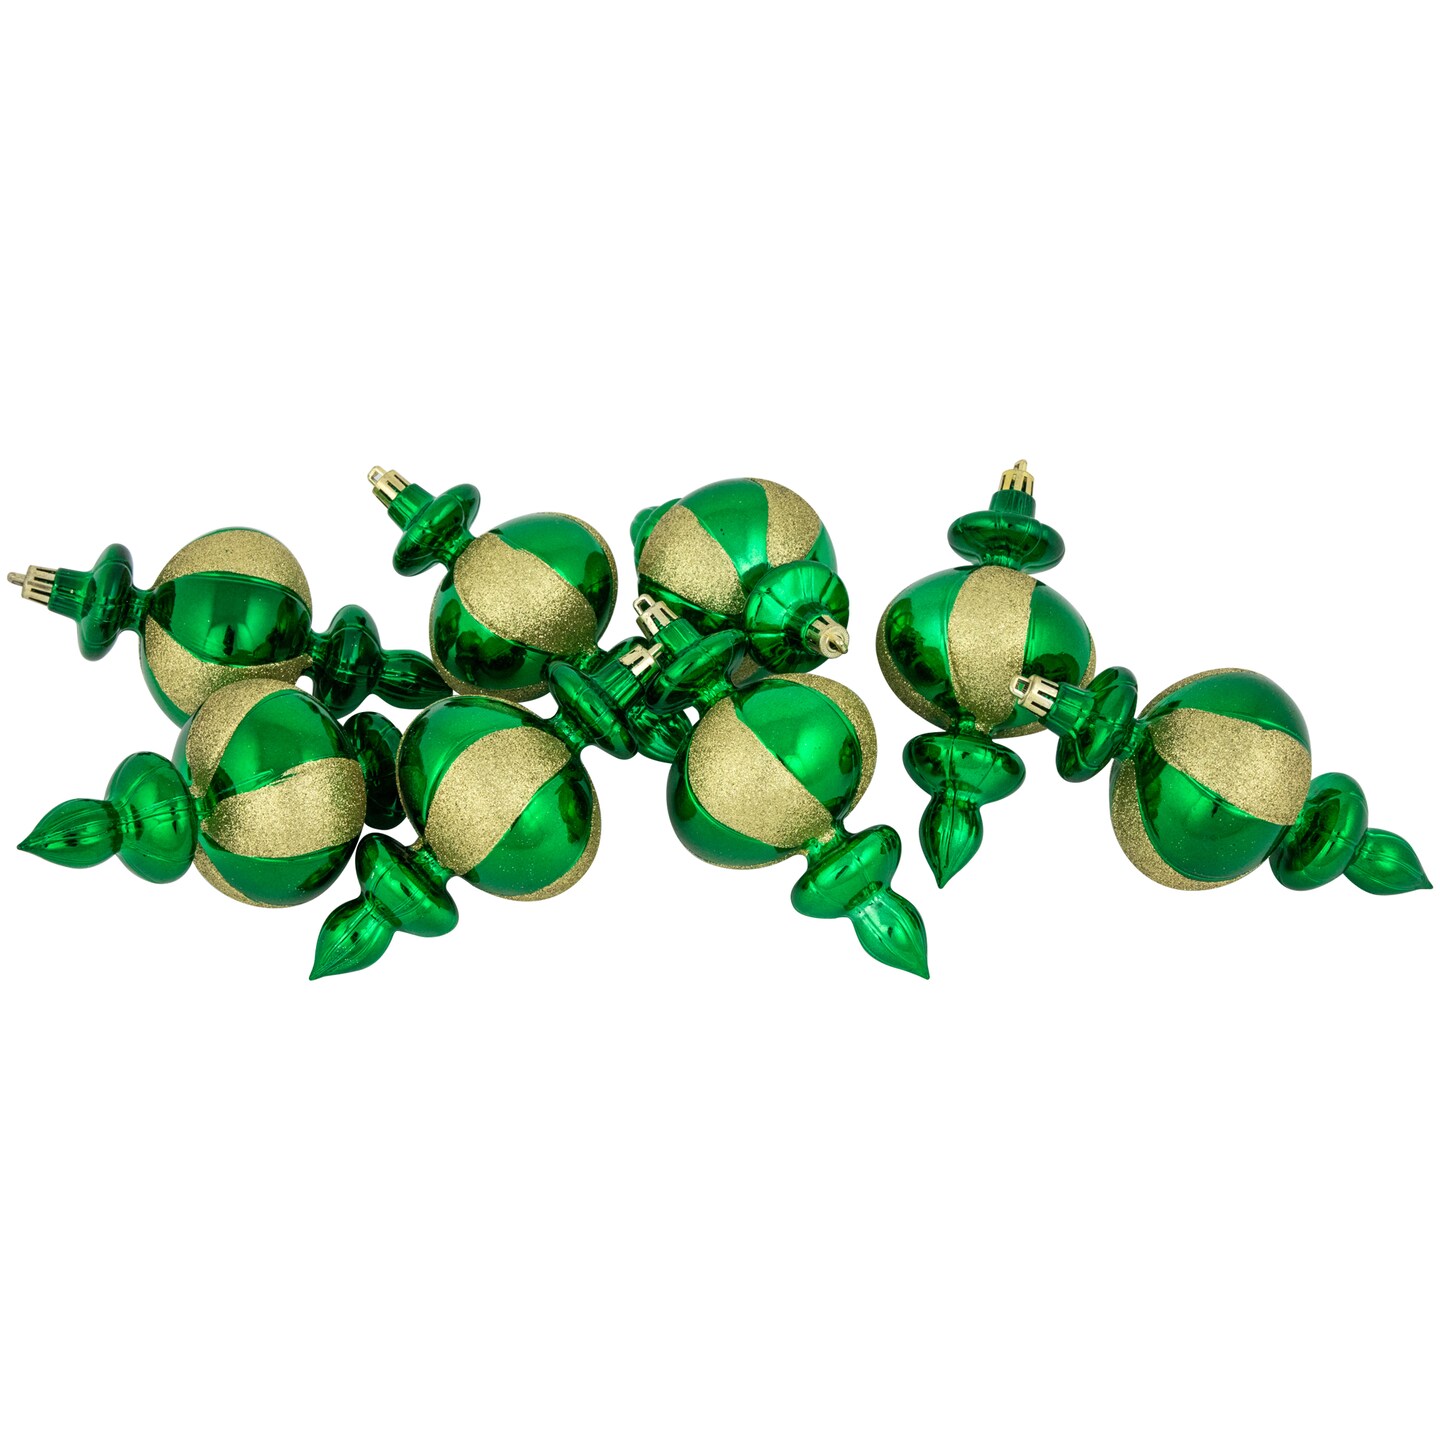 Northlight 8-Count Green Shatterproof Finial Christmas Ornaments, 6 ...